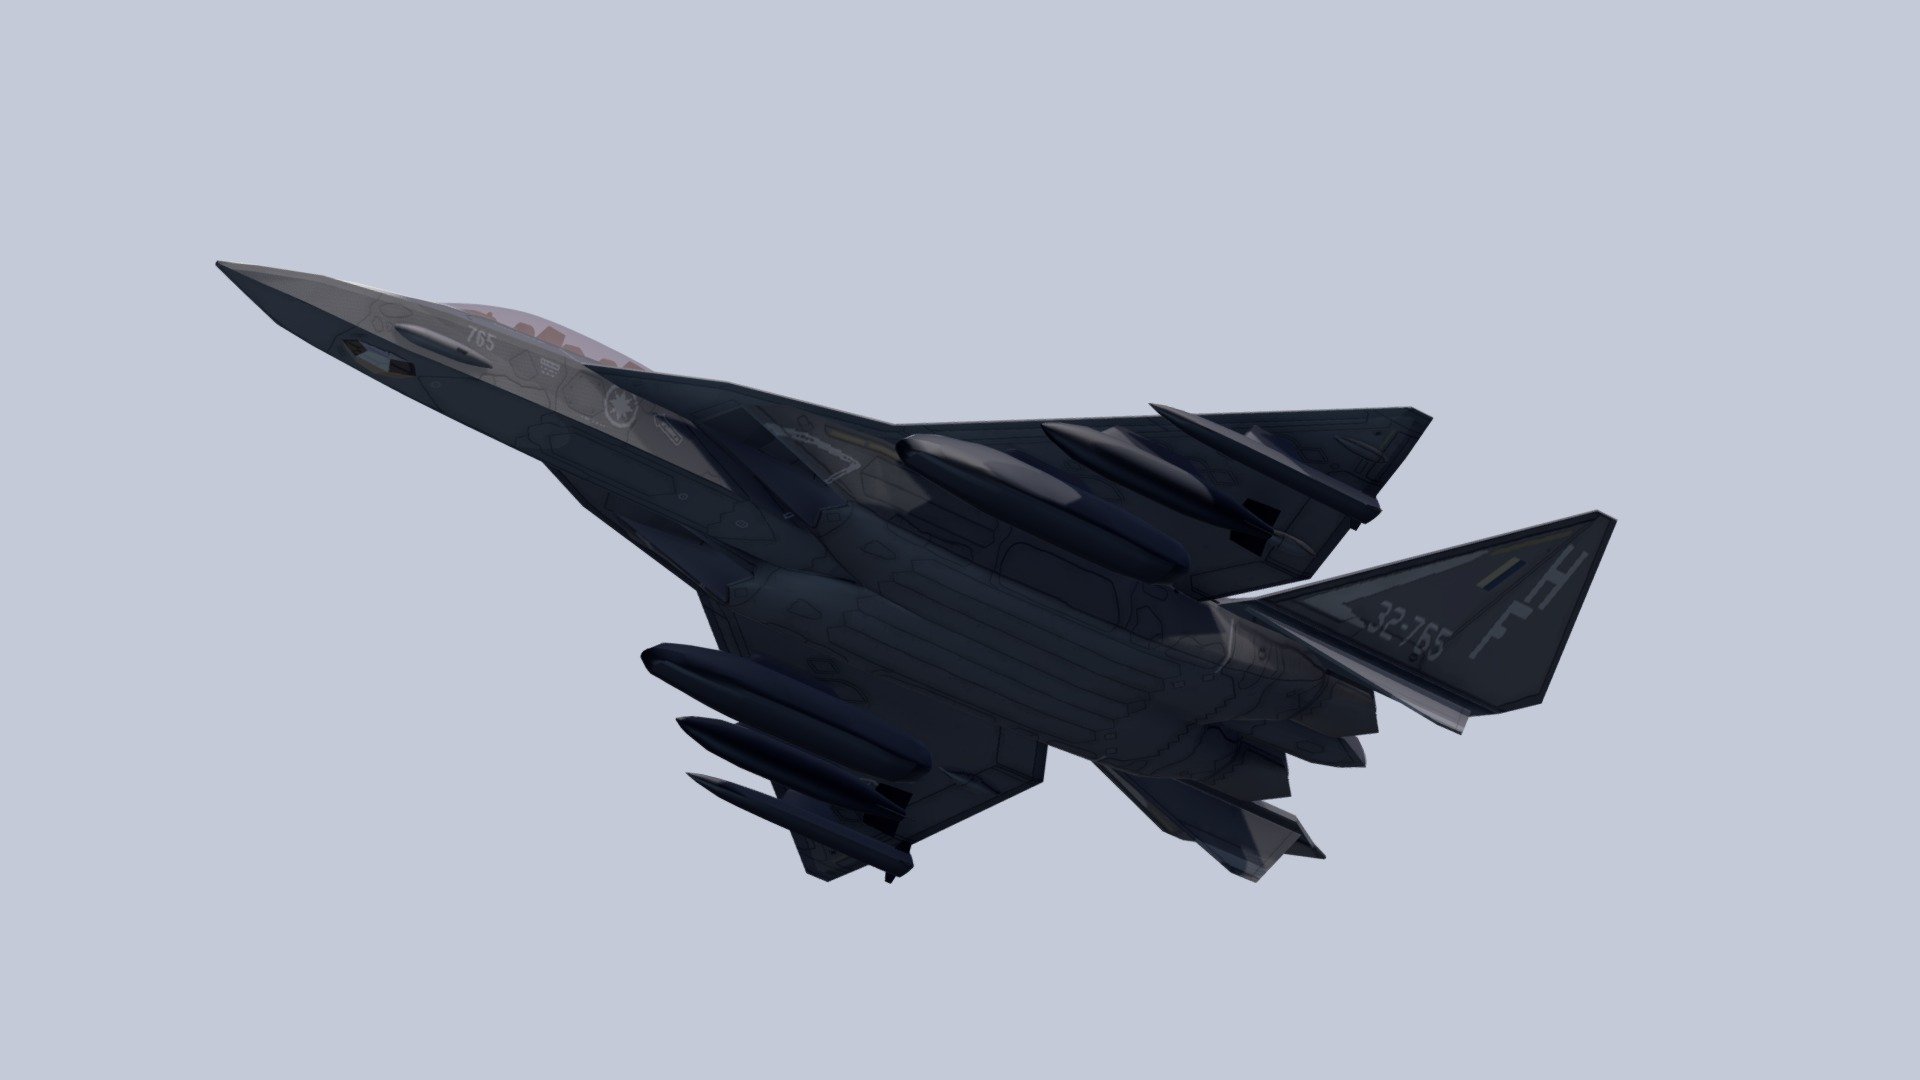 F/A-44E "Aruval" Stealth Fighter-Bomber - Buy Royalty Free 3D model by 2 3 1 2 2 5 (@231225) 3d model